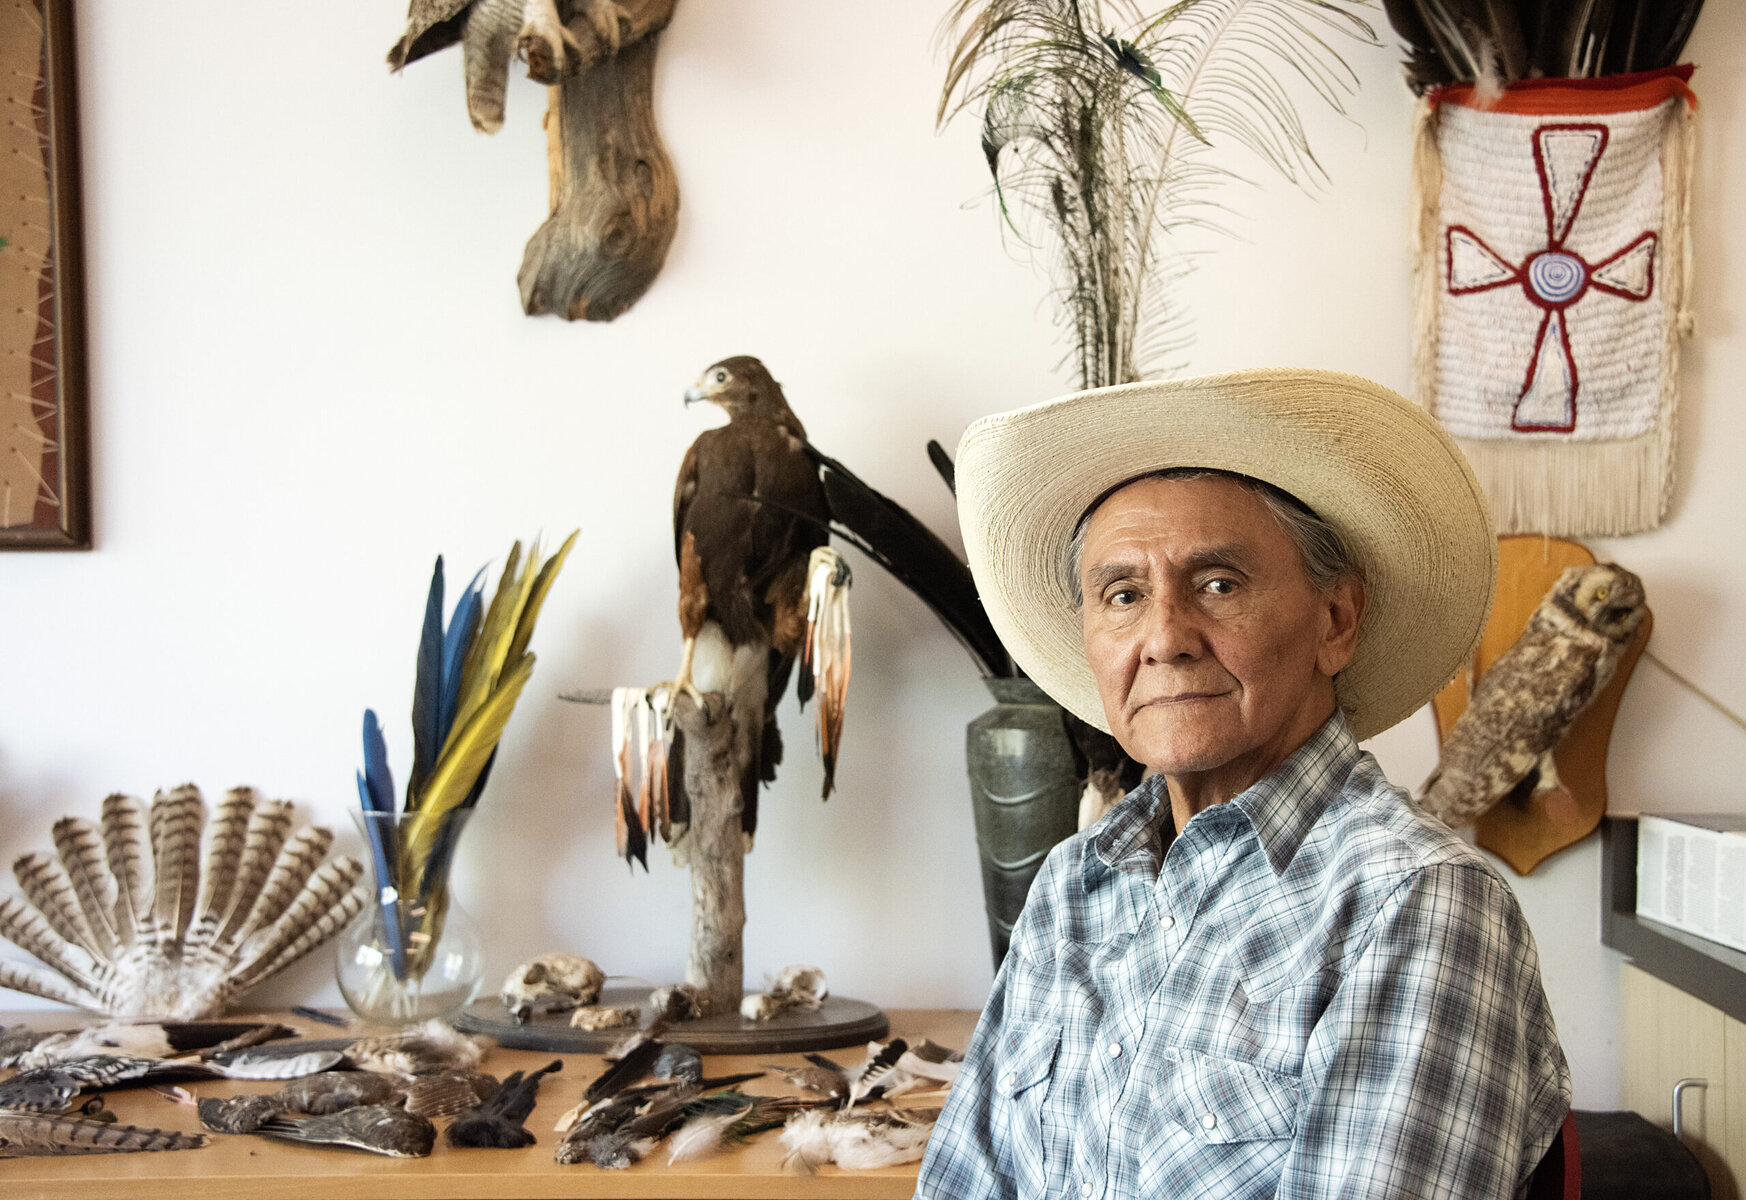 A man in a cowboy hat and plaid shirt sits in front of a table with feathers on it.